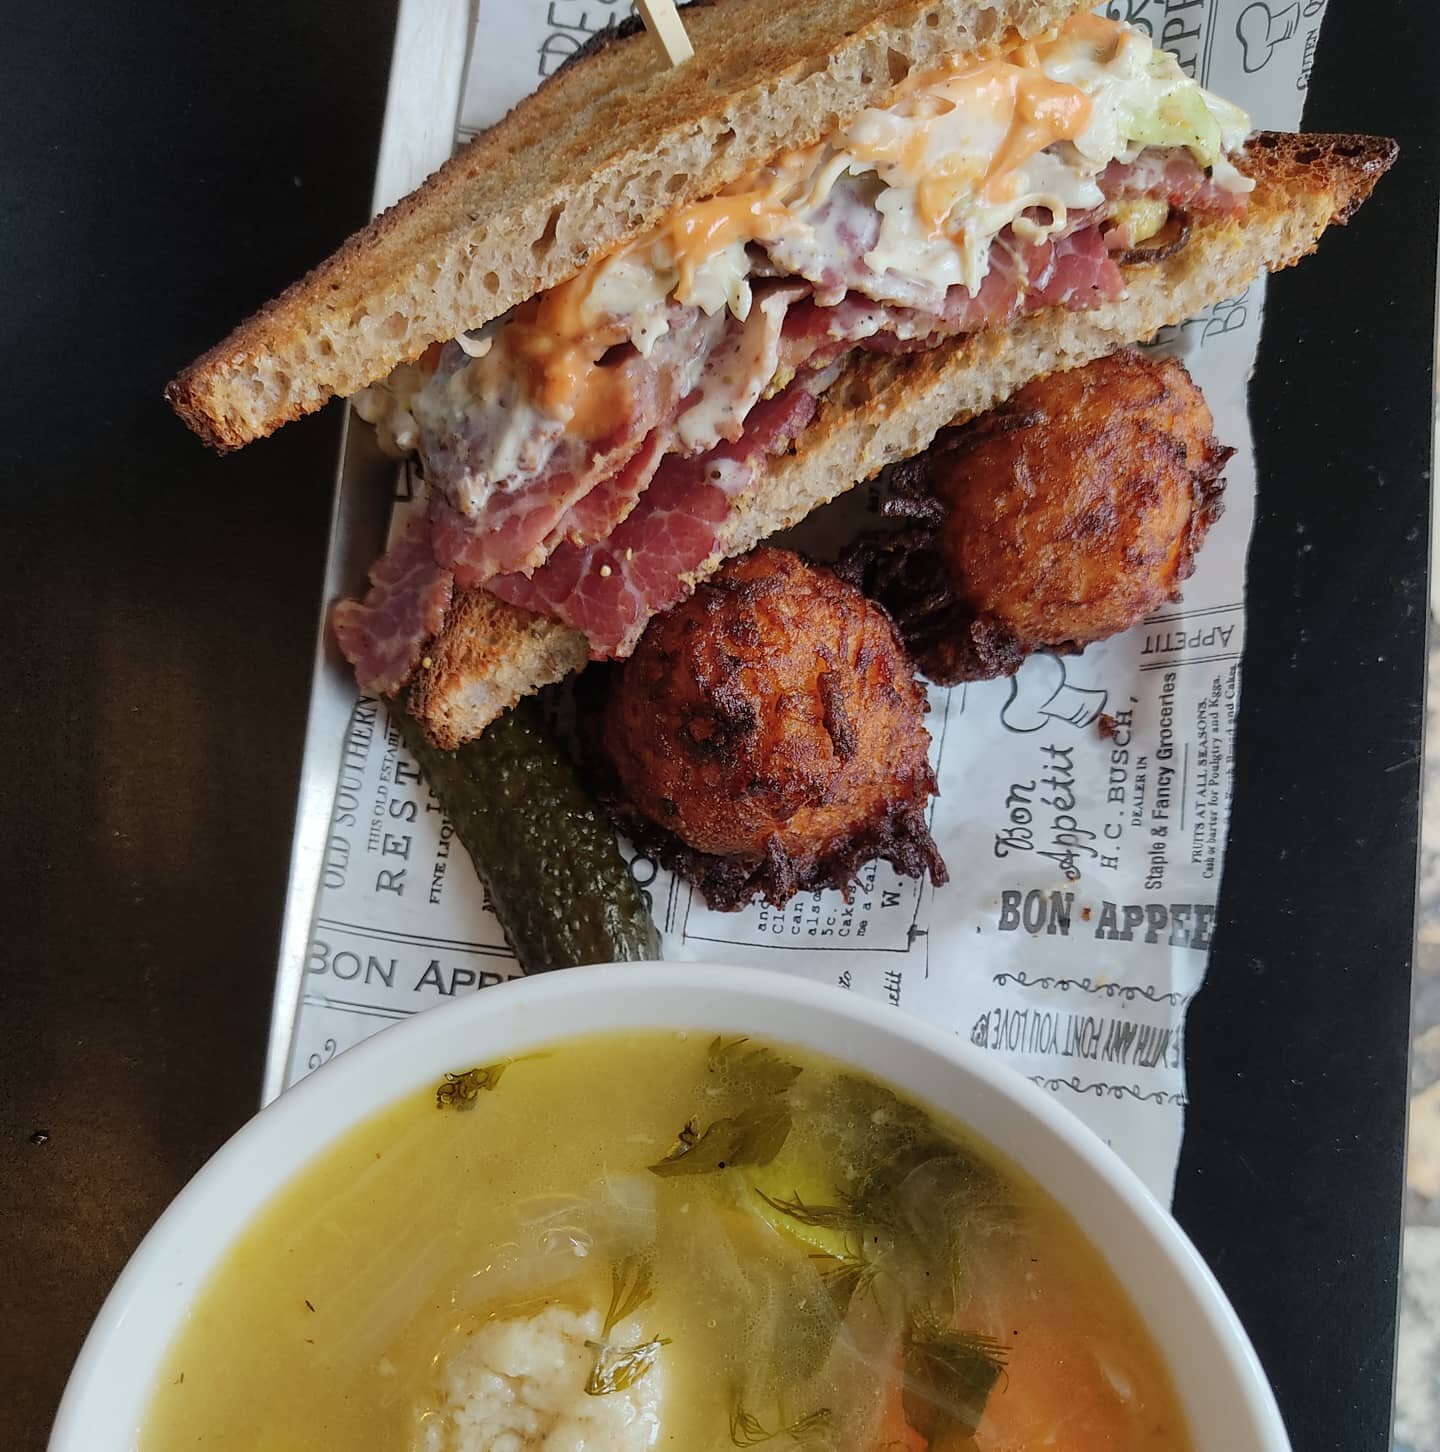 Nothing like the hottest day of the year to announce the best lunch around! 
In true deli tradition, we're now offering half a sandwich and a soup. 

At Shmaltz it's always chicken soup weather, so pop on by for some Ashkenaz Soul Food!

חדש בשמאלץ! 